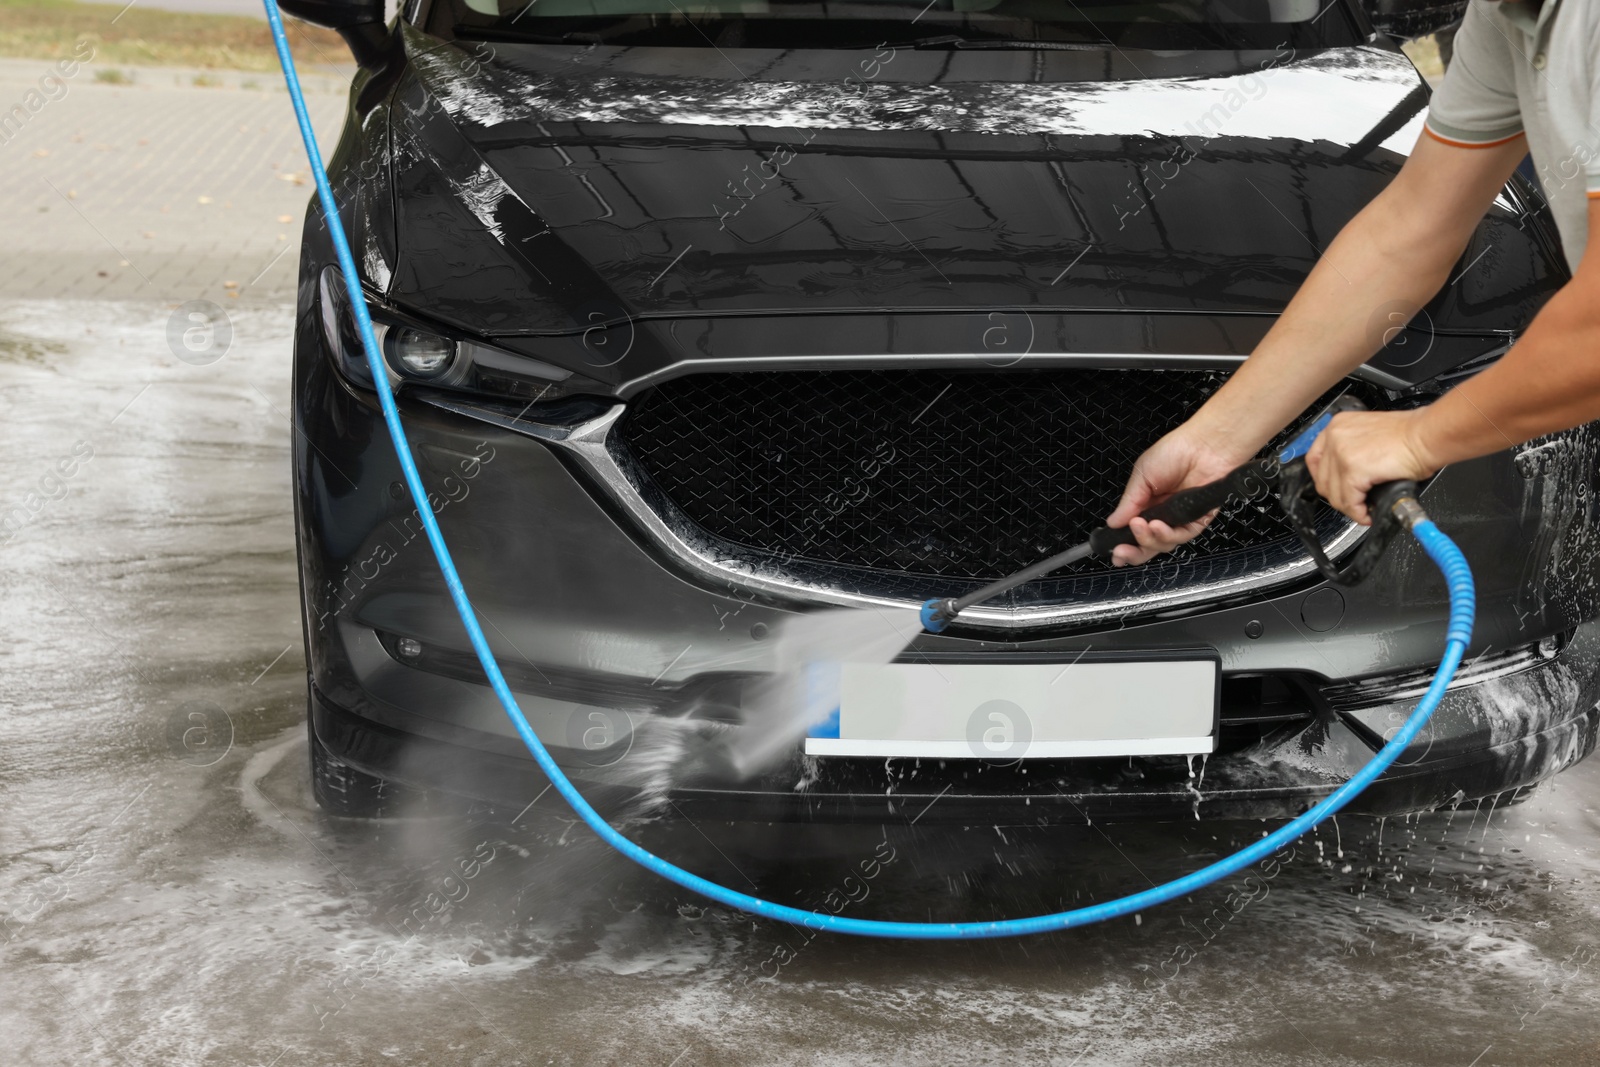 Photo of Man washing auto with high pressure water jet at car wash, closeup